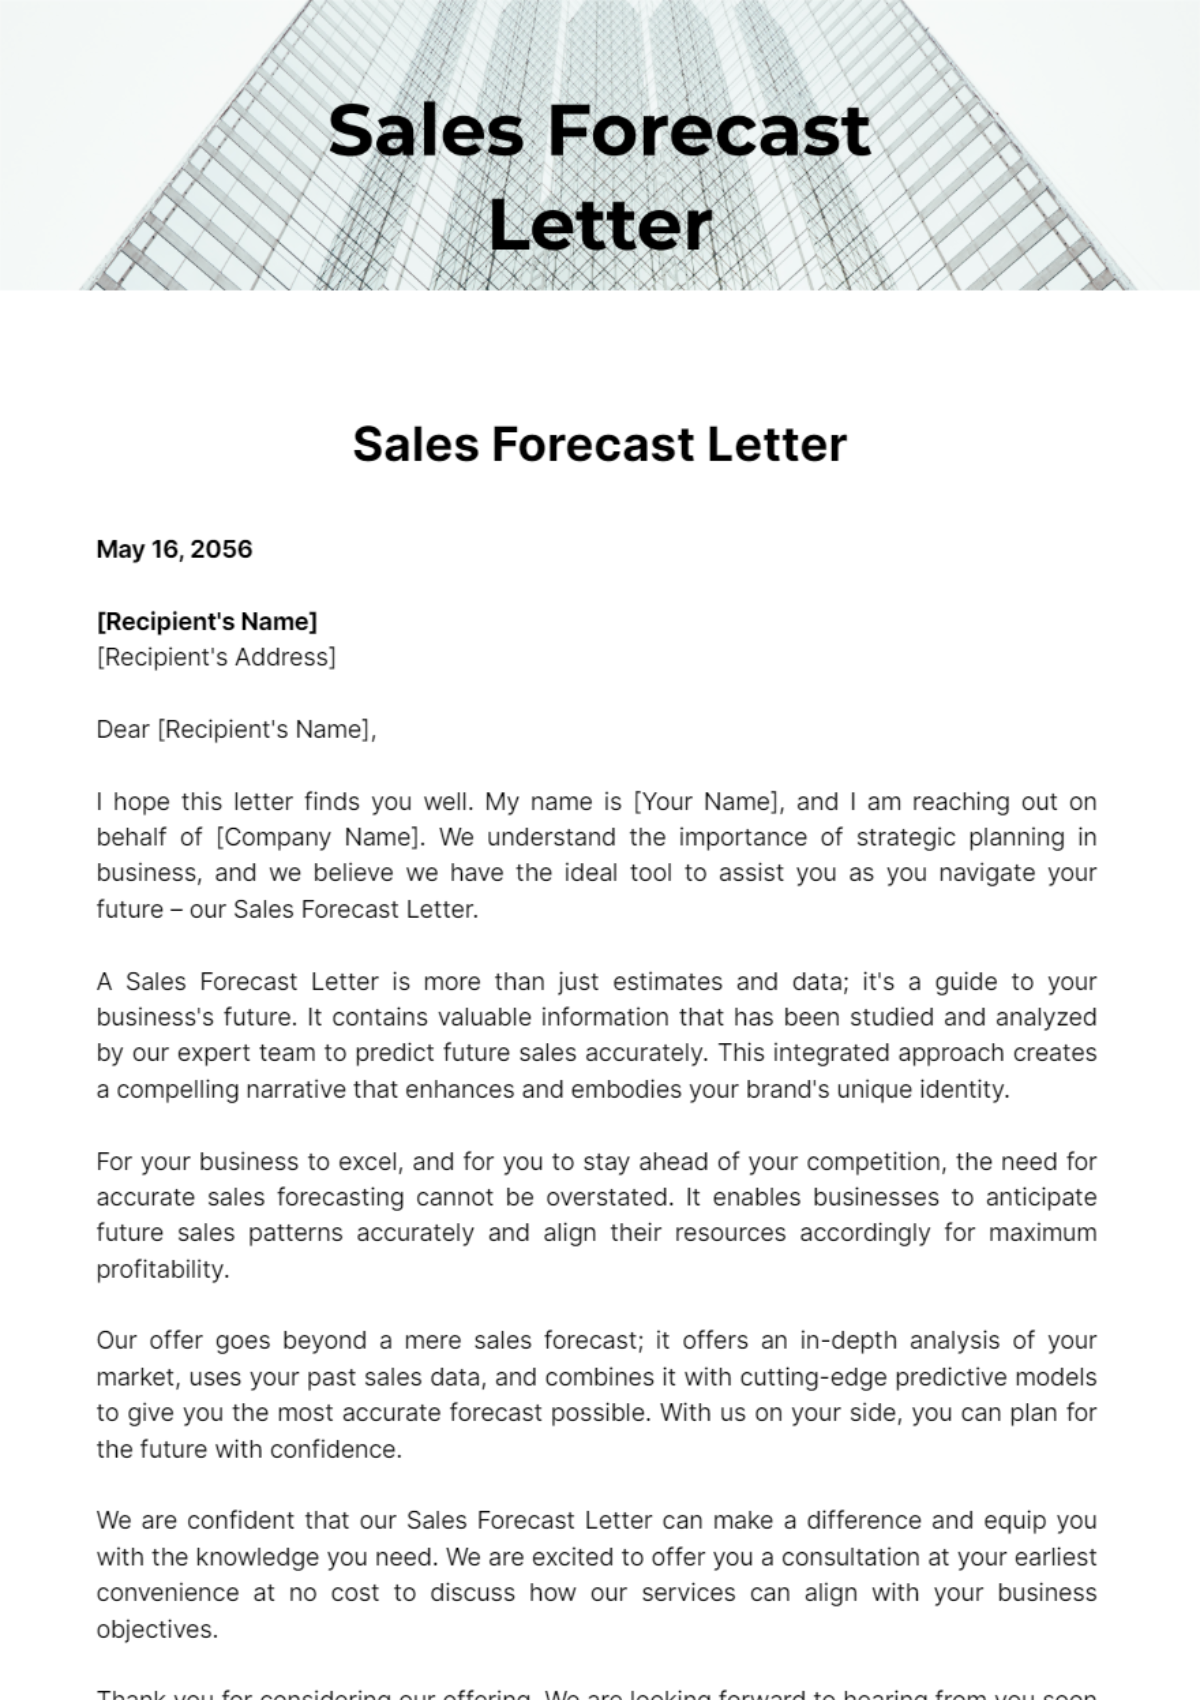 Free Sales Forecast Letter Template